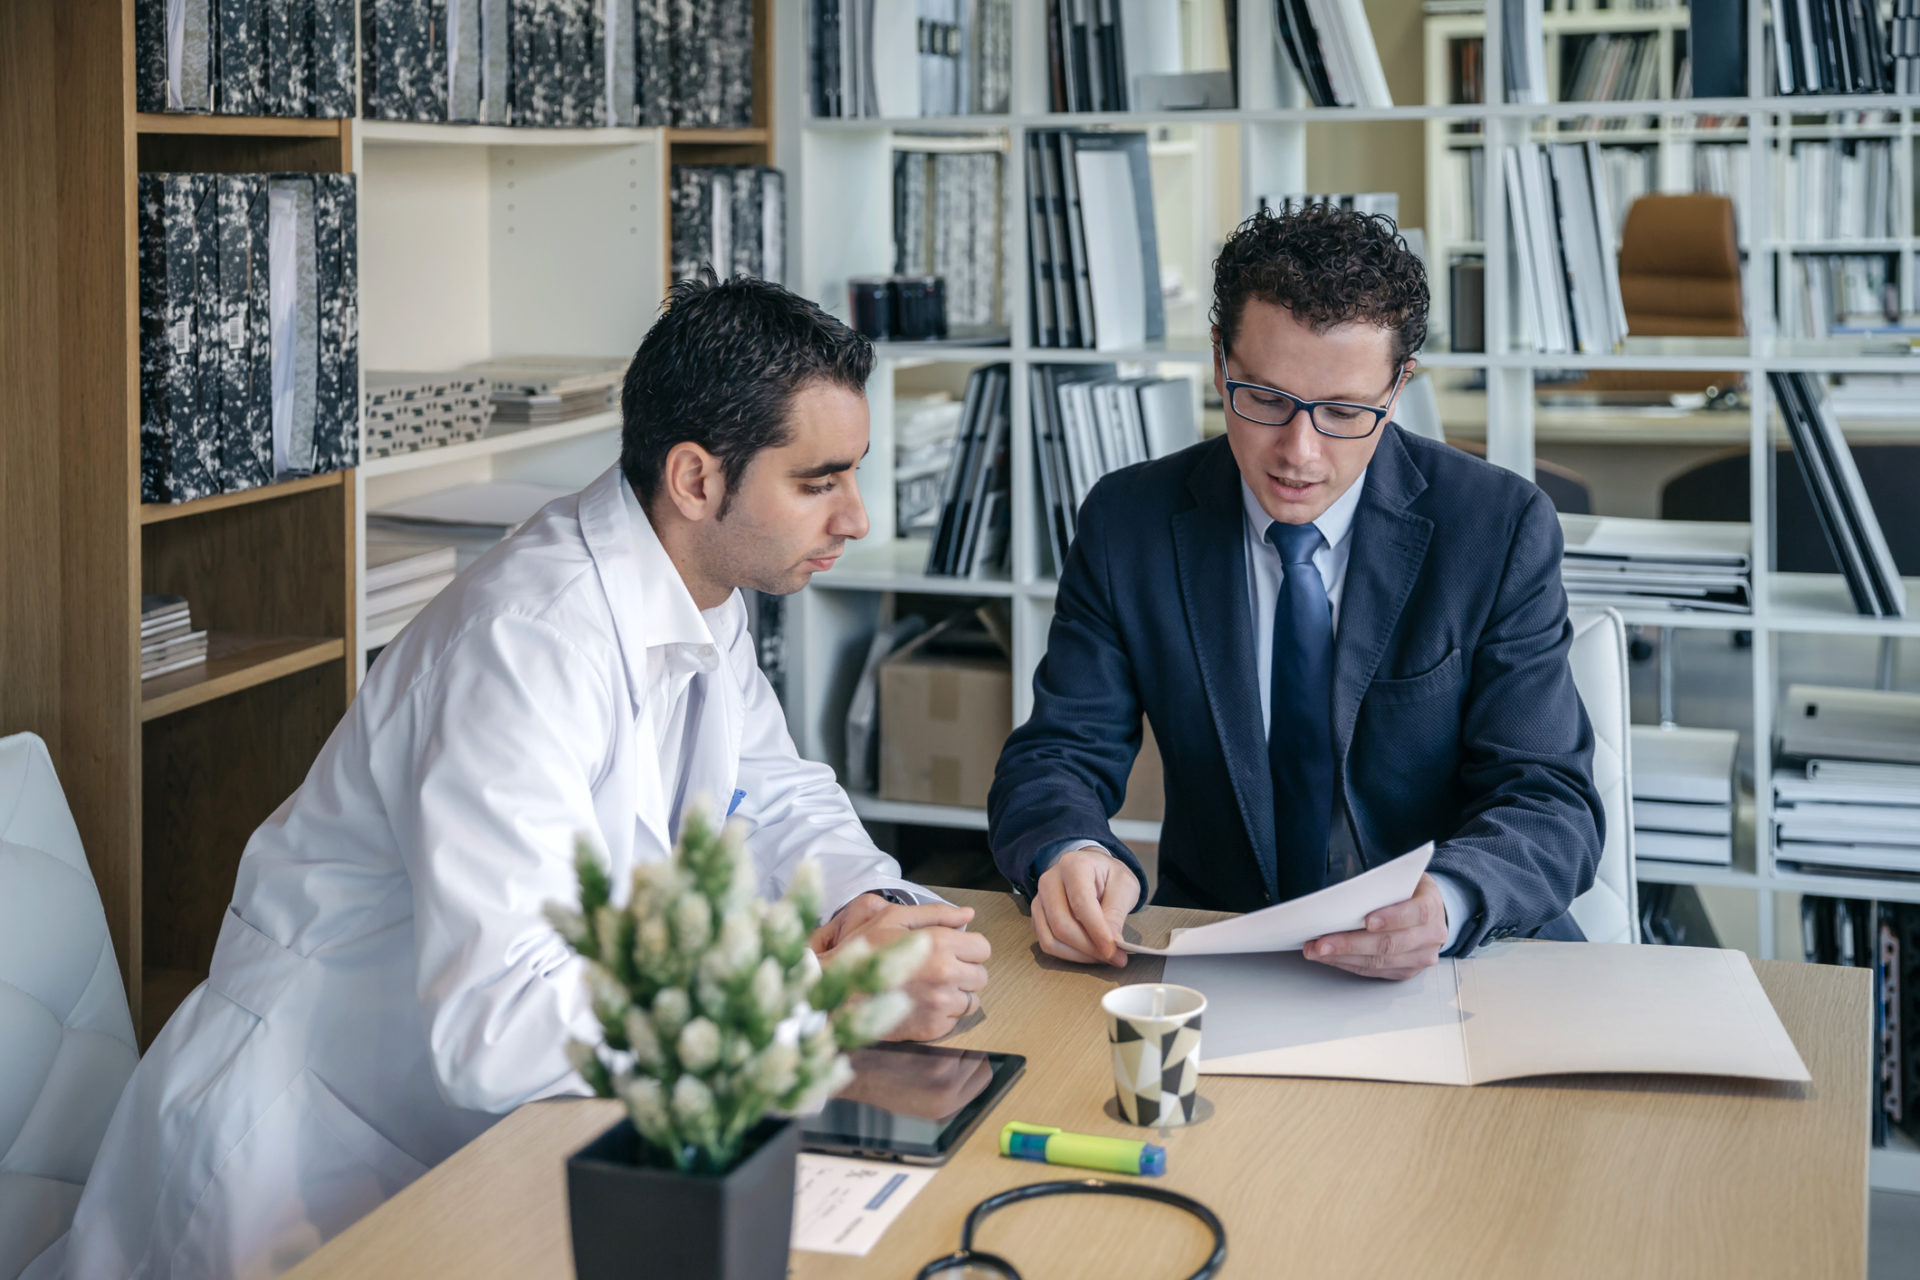 Man in suit explaining documents to doctor in medical office